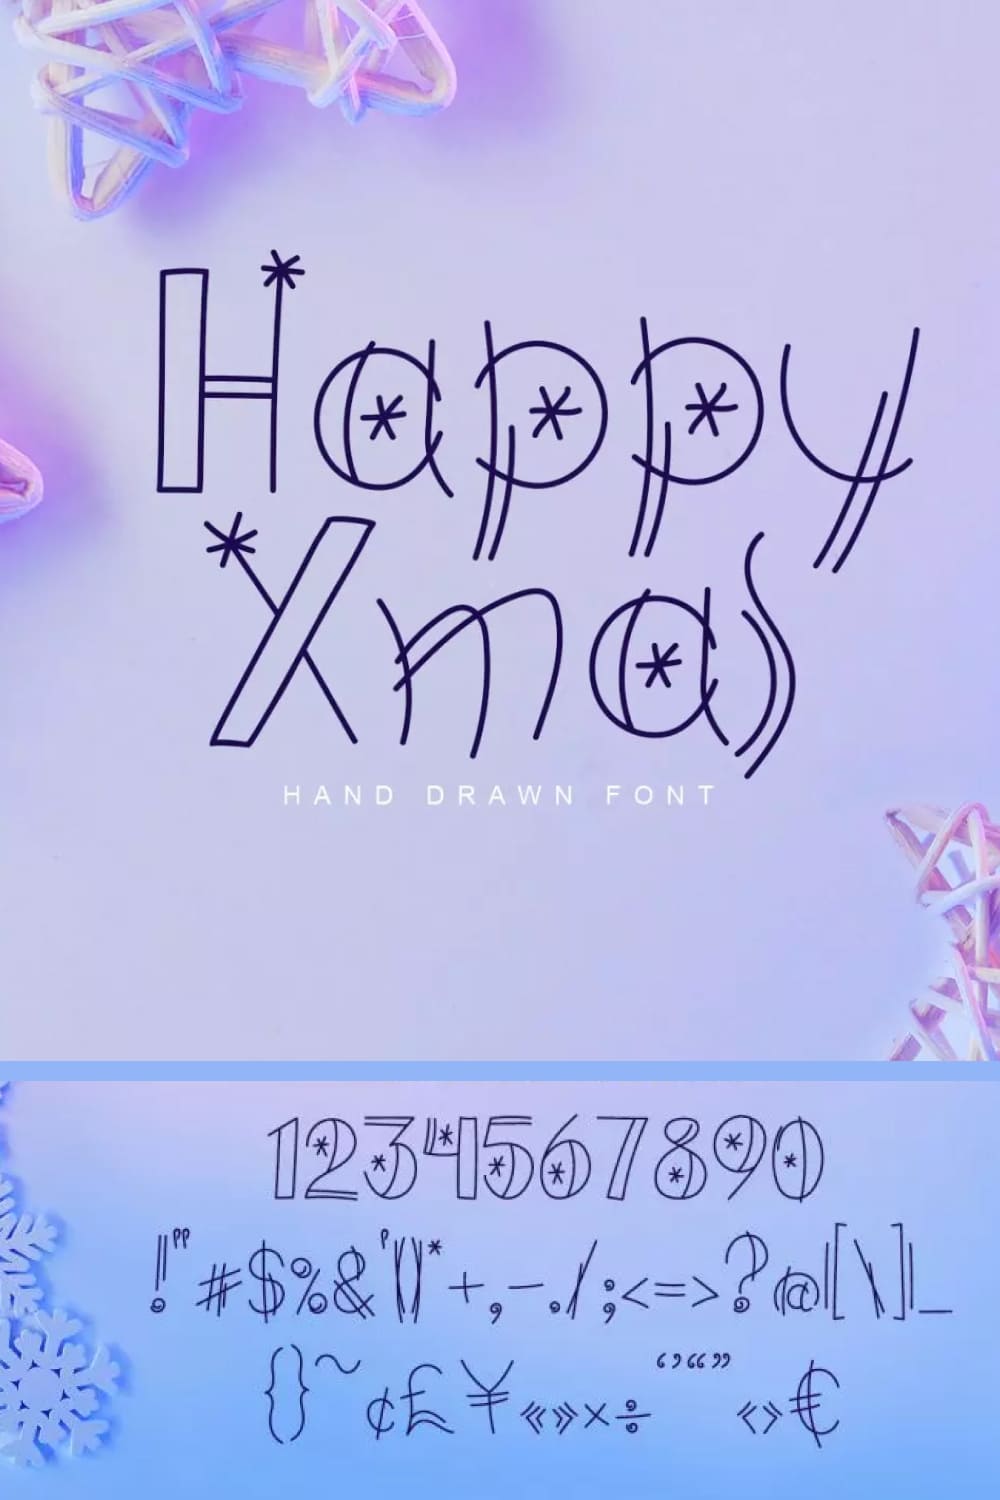 Happy Xmas Hand Drawn Font decorated with stars.